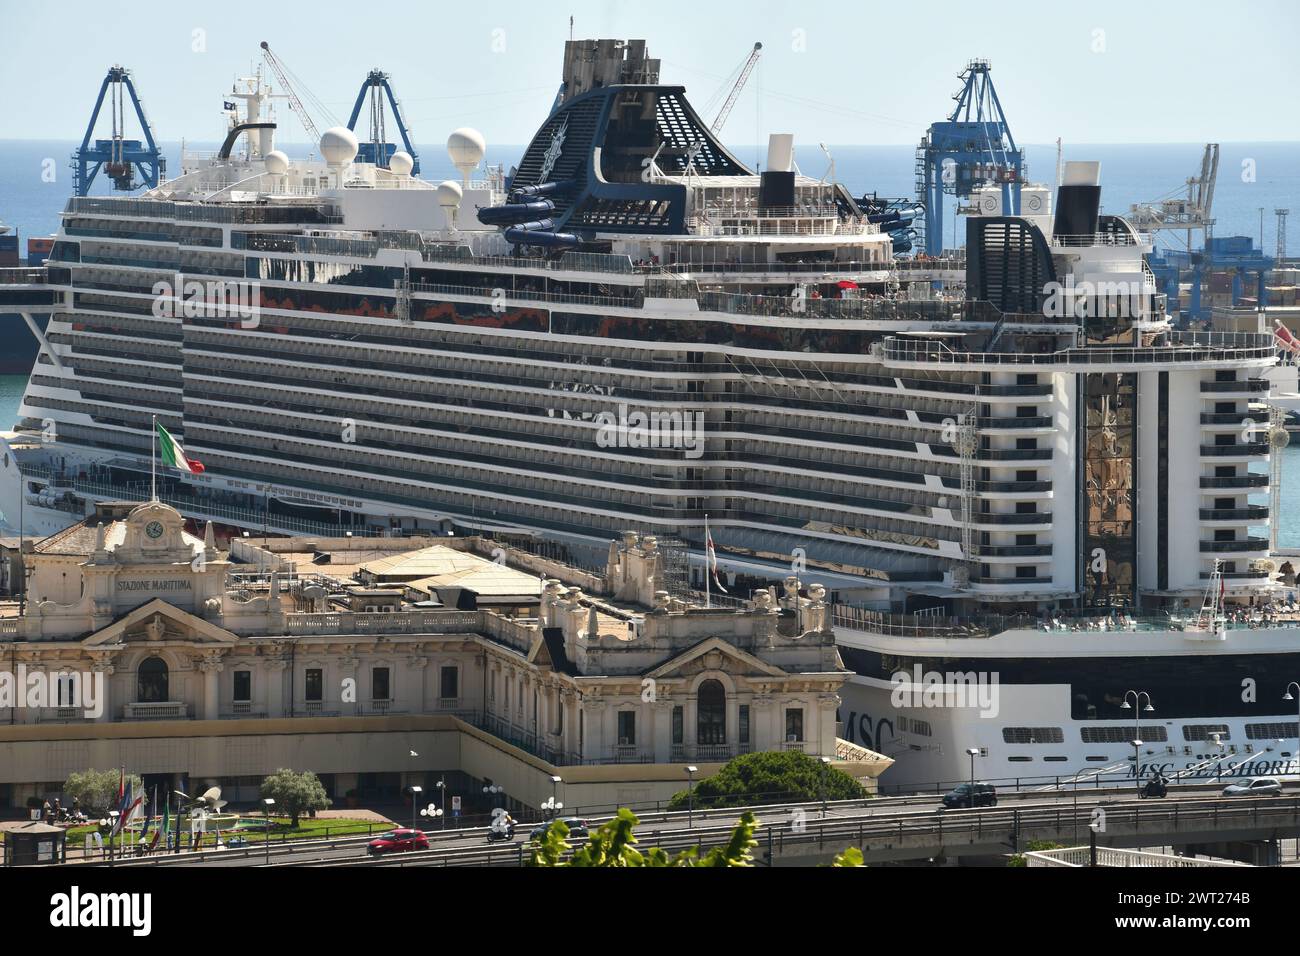 The port of Genoa is a place of great charm with large ships, containers, the Genoa Lantern, the Bigo, the Biosphere and Renzo Piano's Aquarium. Stock Photo